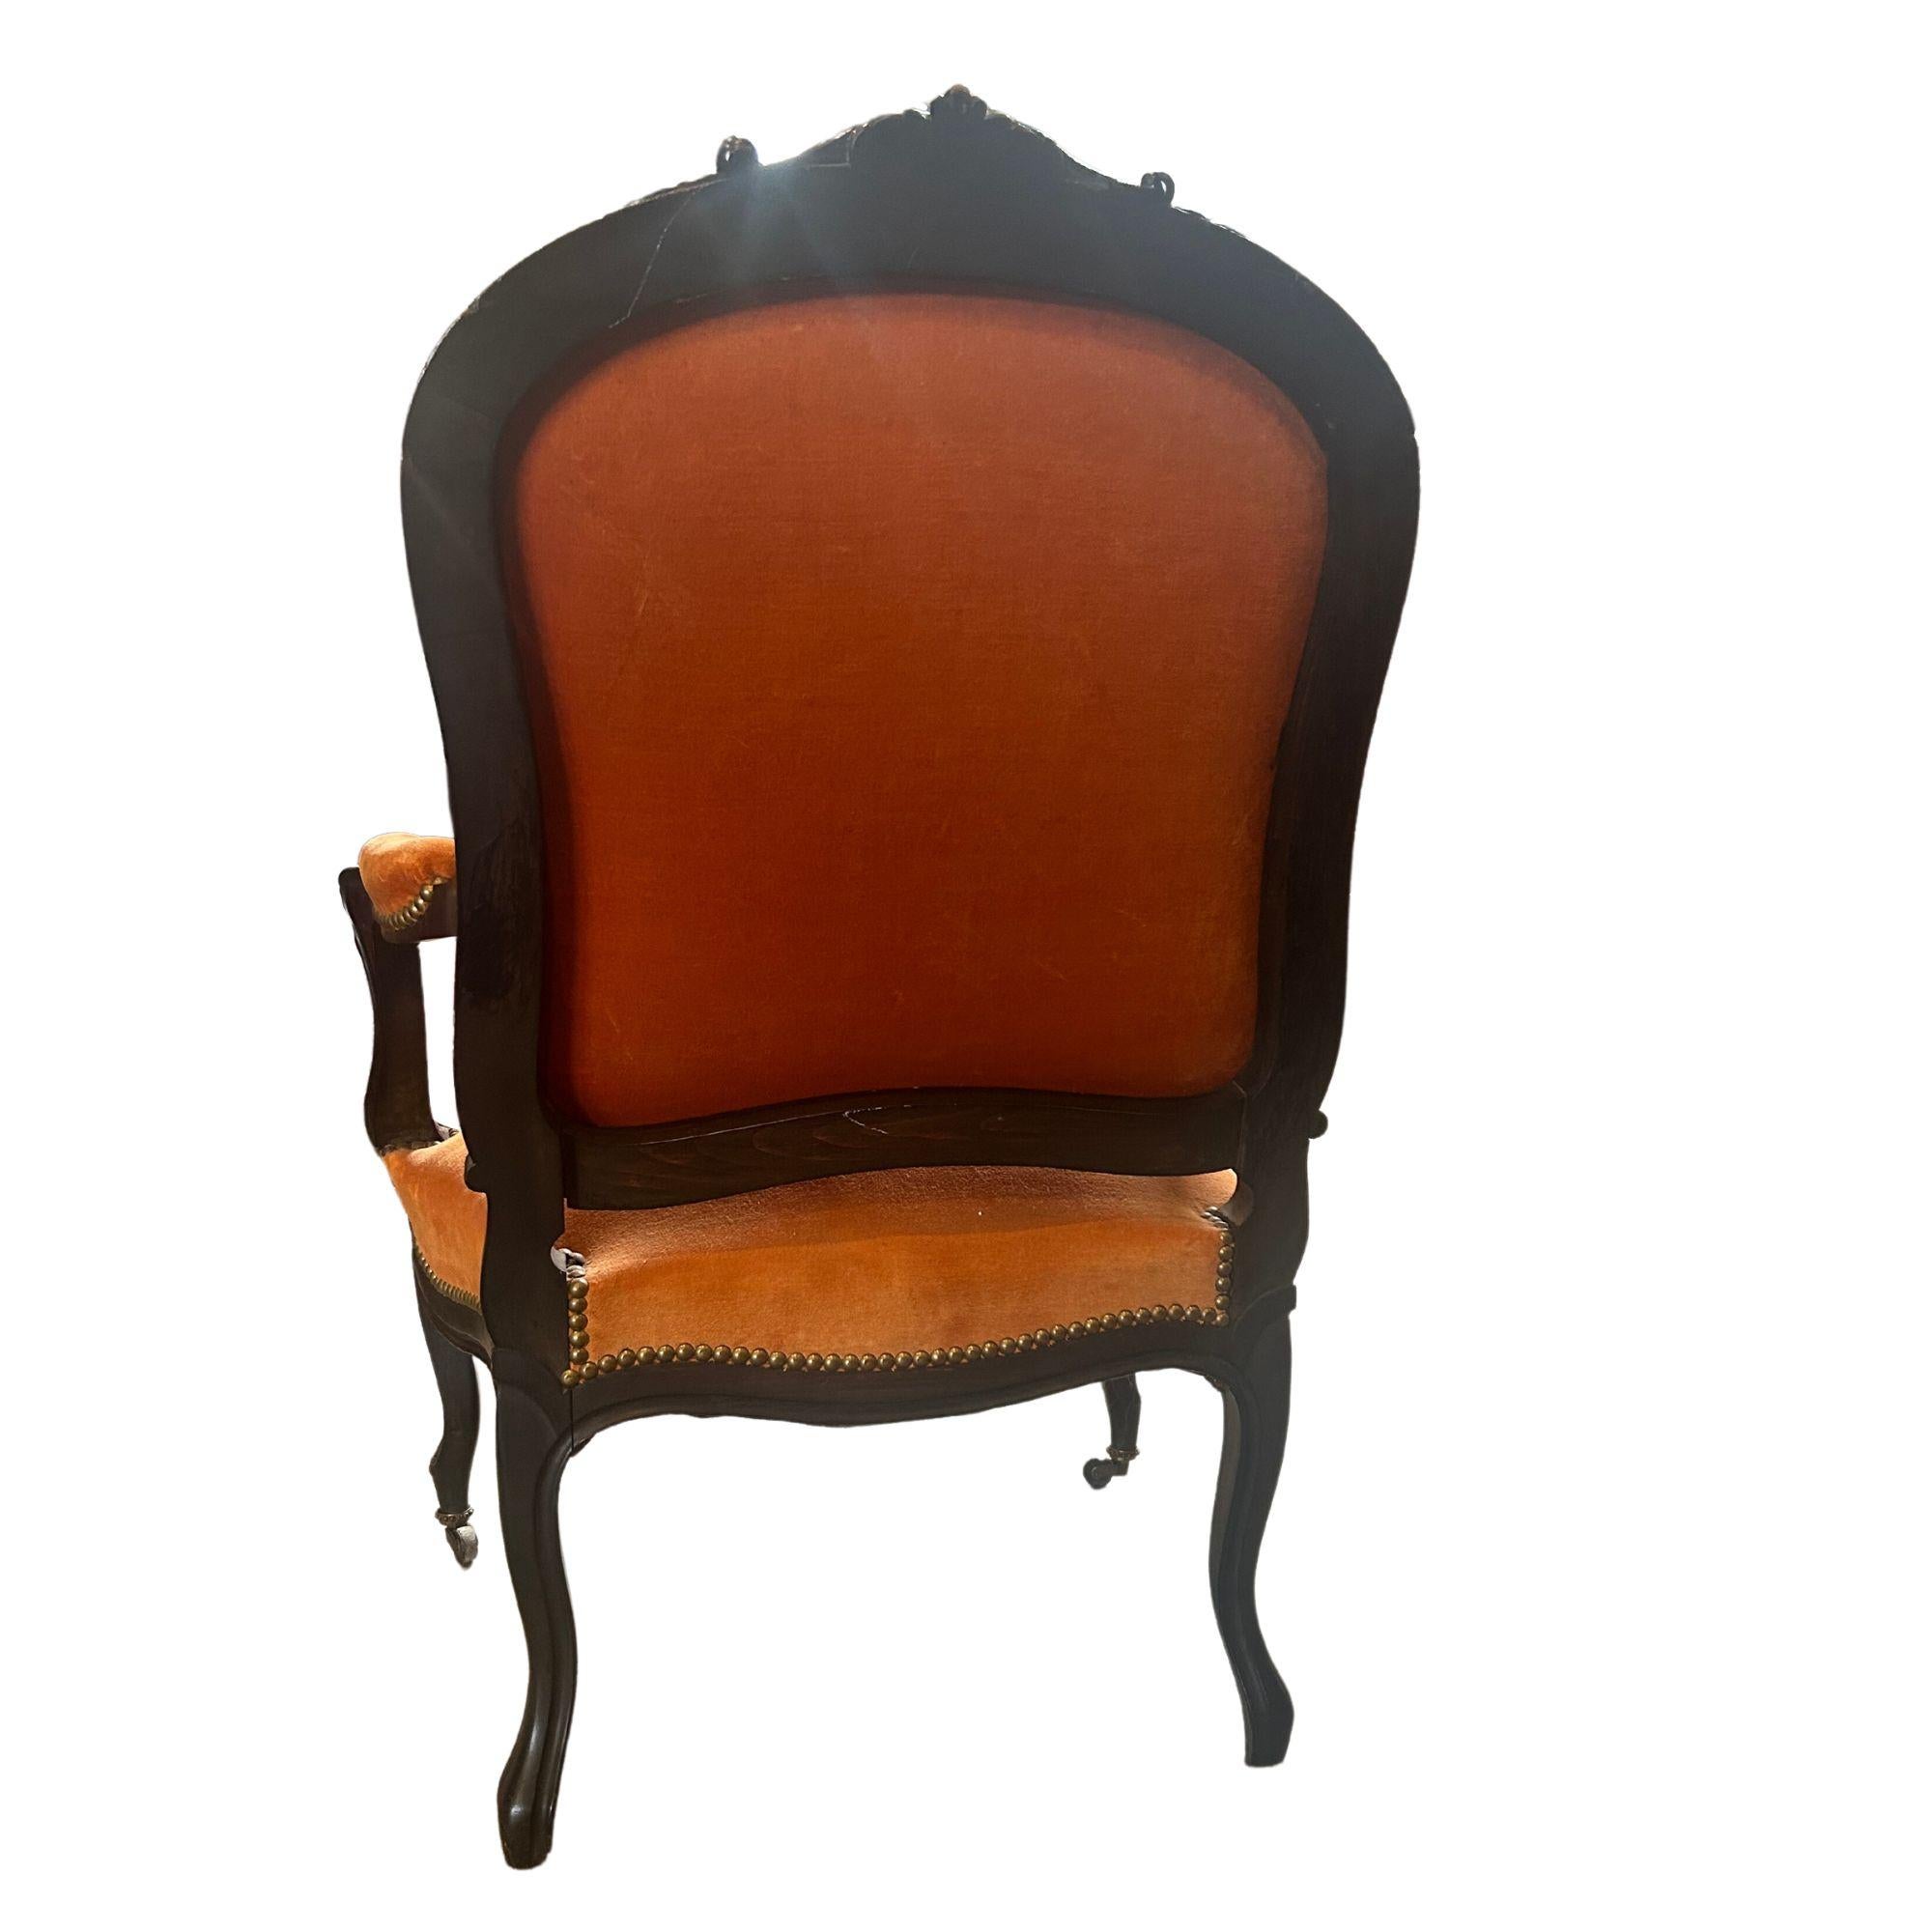 Late 19th Century French 19th Century Chairs with Original Black Patina - Set of 2 For Sale